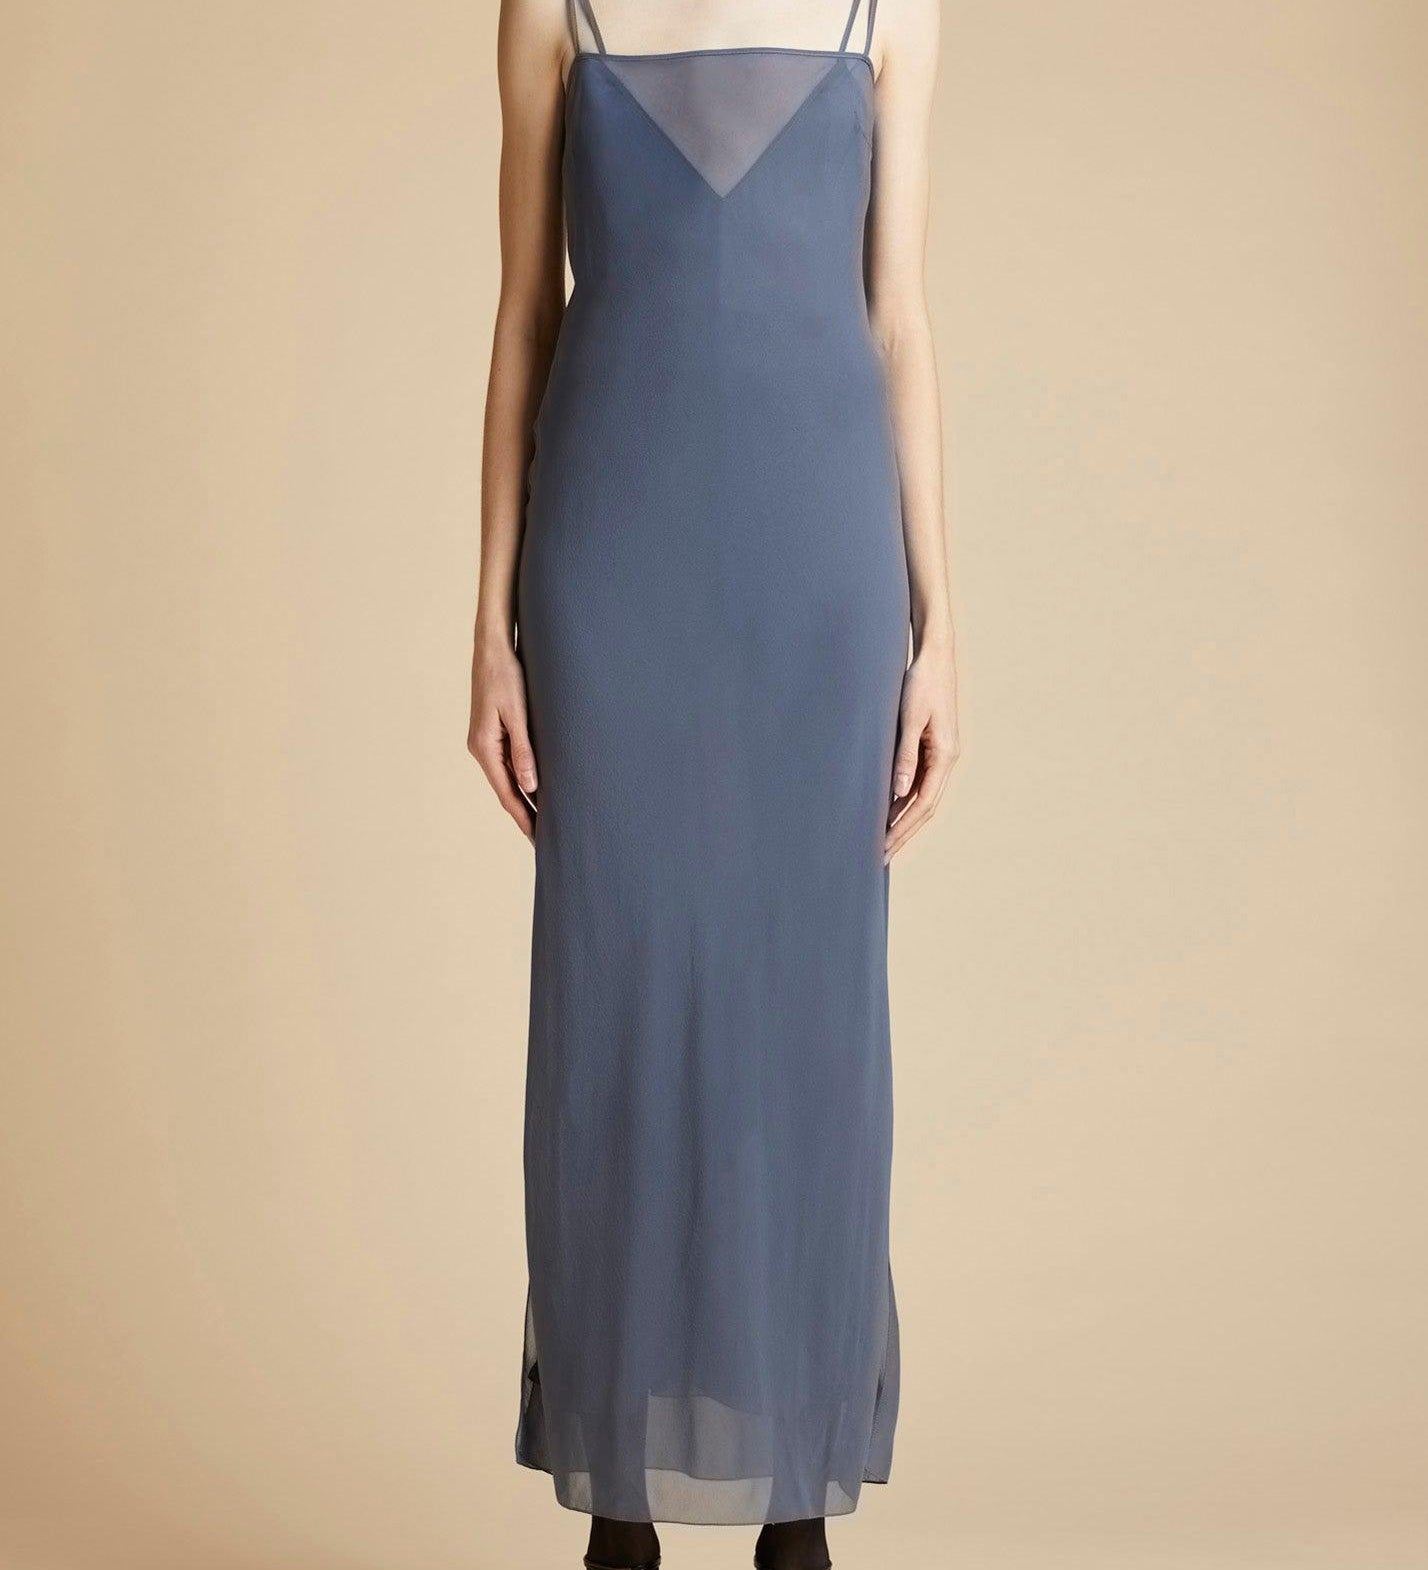 The Allegra Slip Dress in Slate - The Iconic Issue